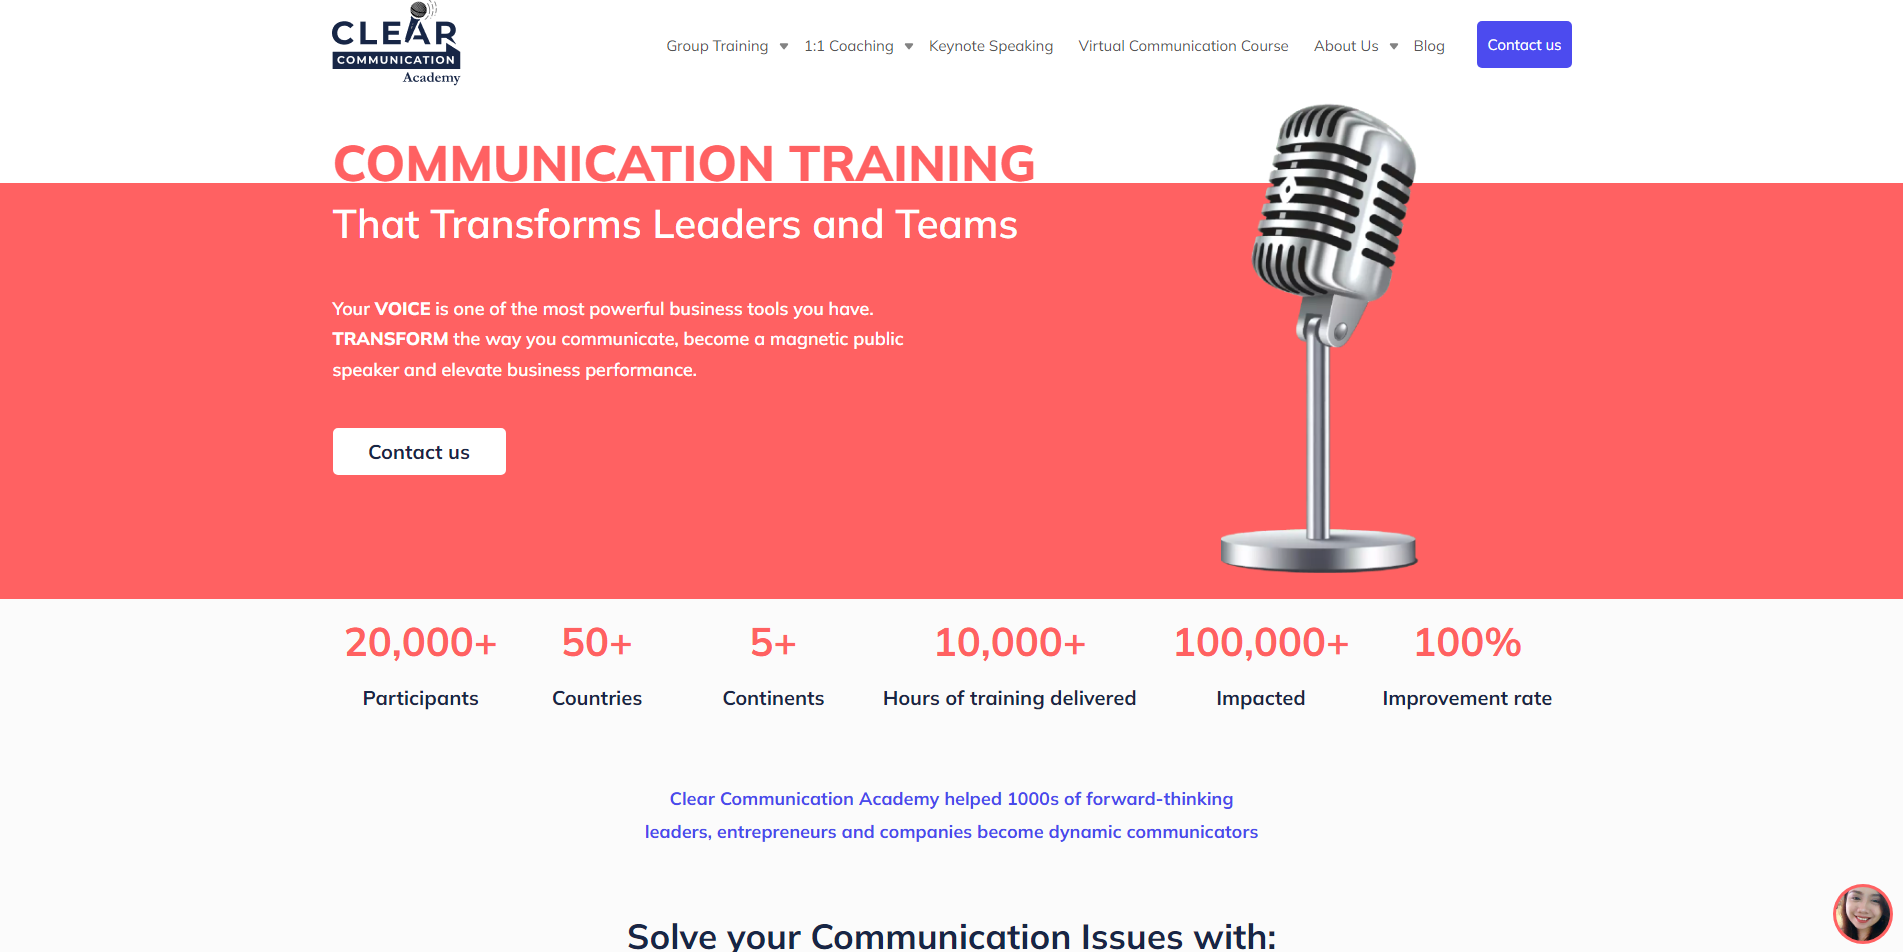 Clear Communication Academy